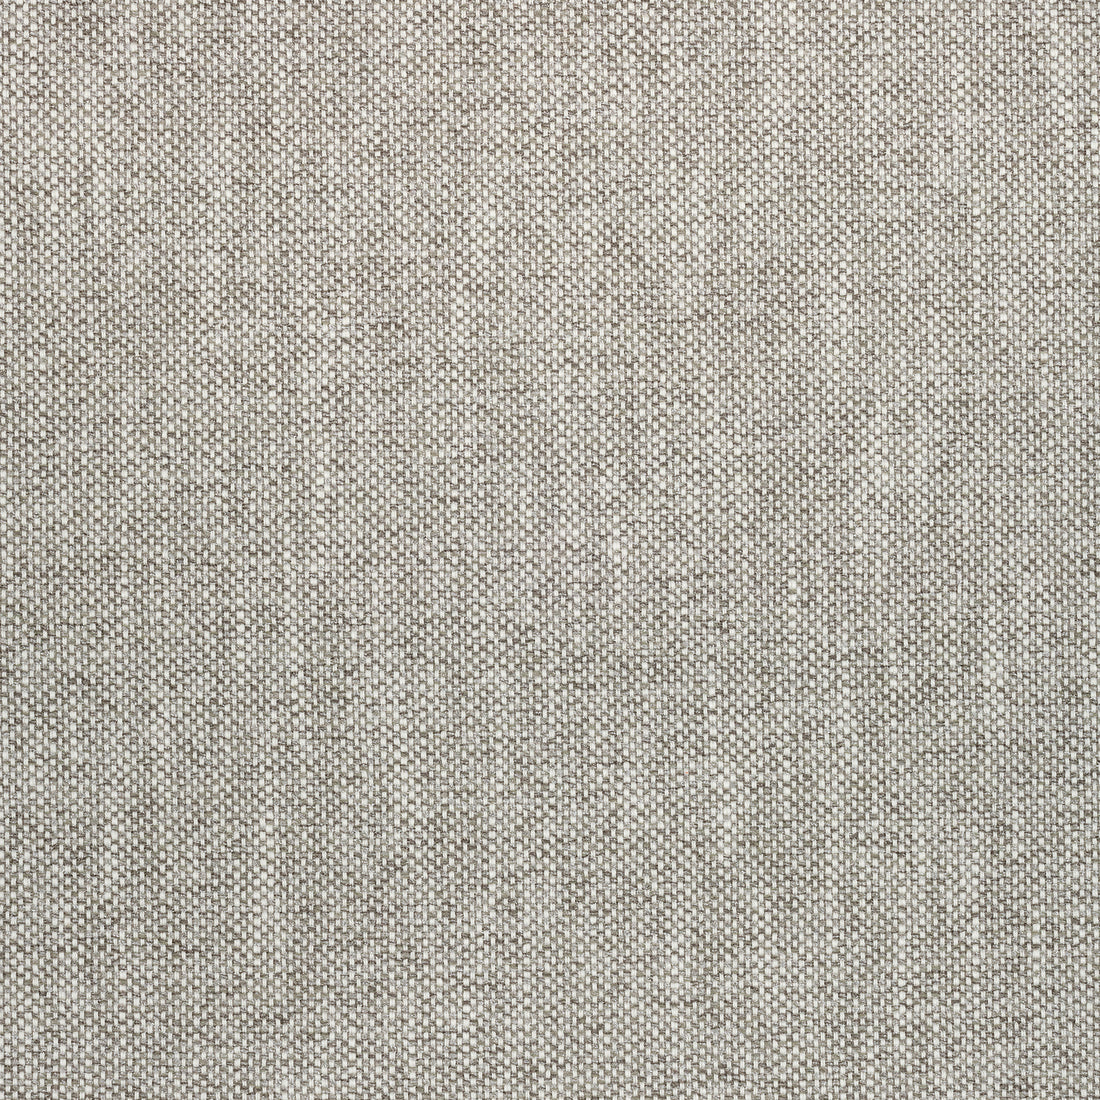 Wellfleet fabric in sterling color - pattern number W73420 - by Thibaut in the Landmark Textures collection